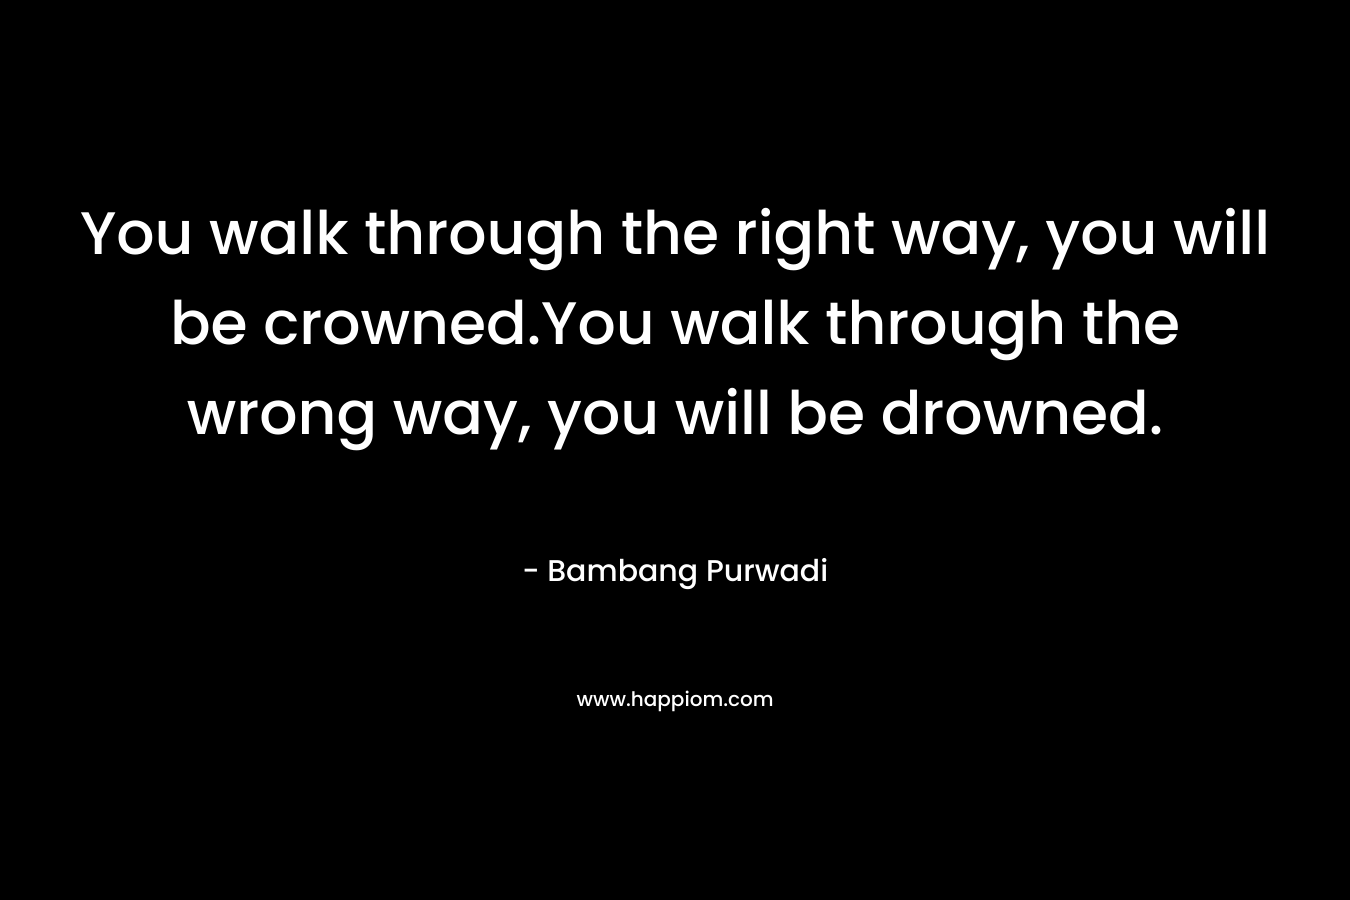 You walk through the right way, you will be crowned.You walk through the wrong way, you will be drowned.